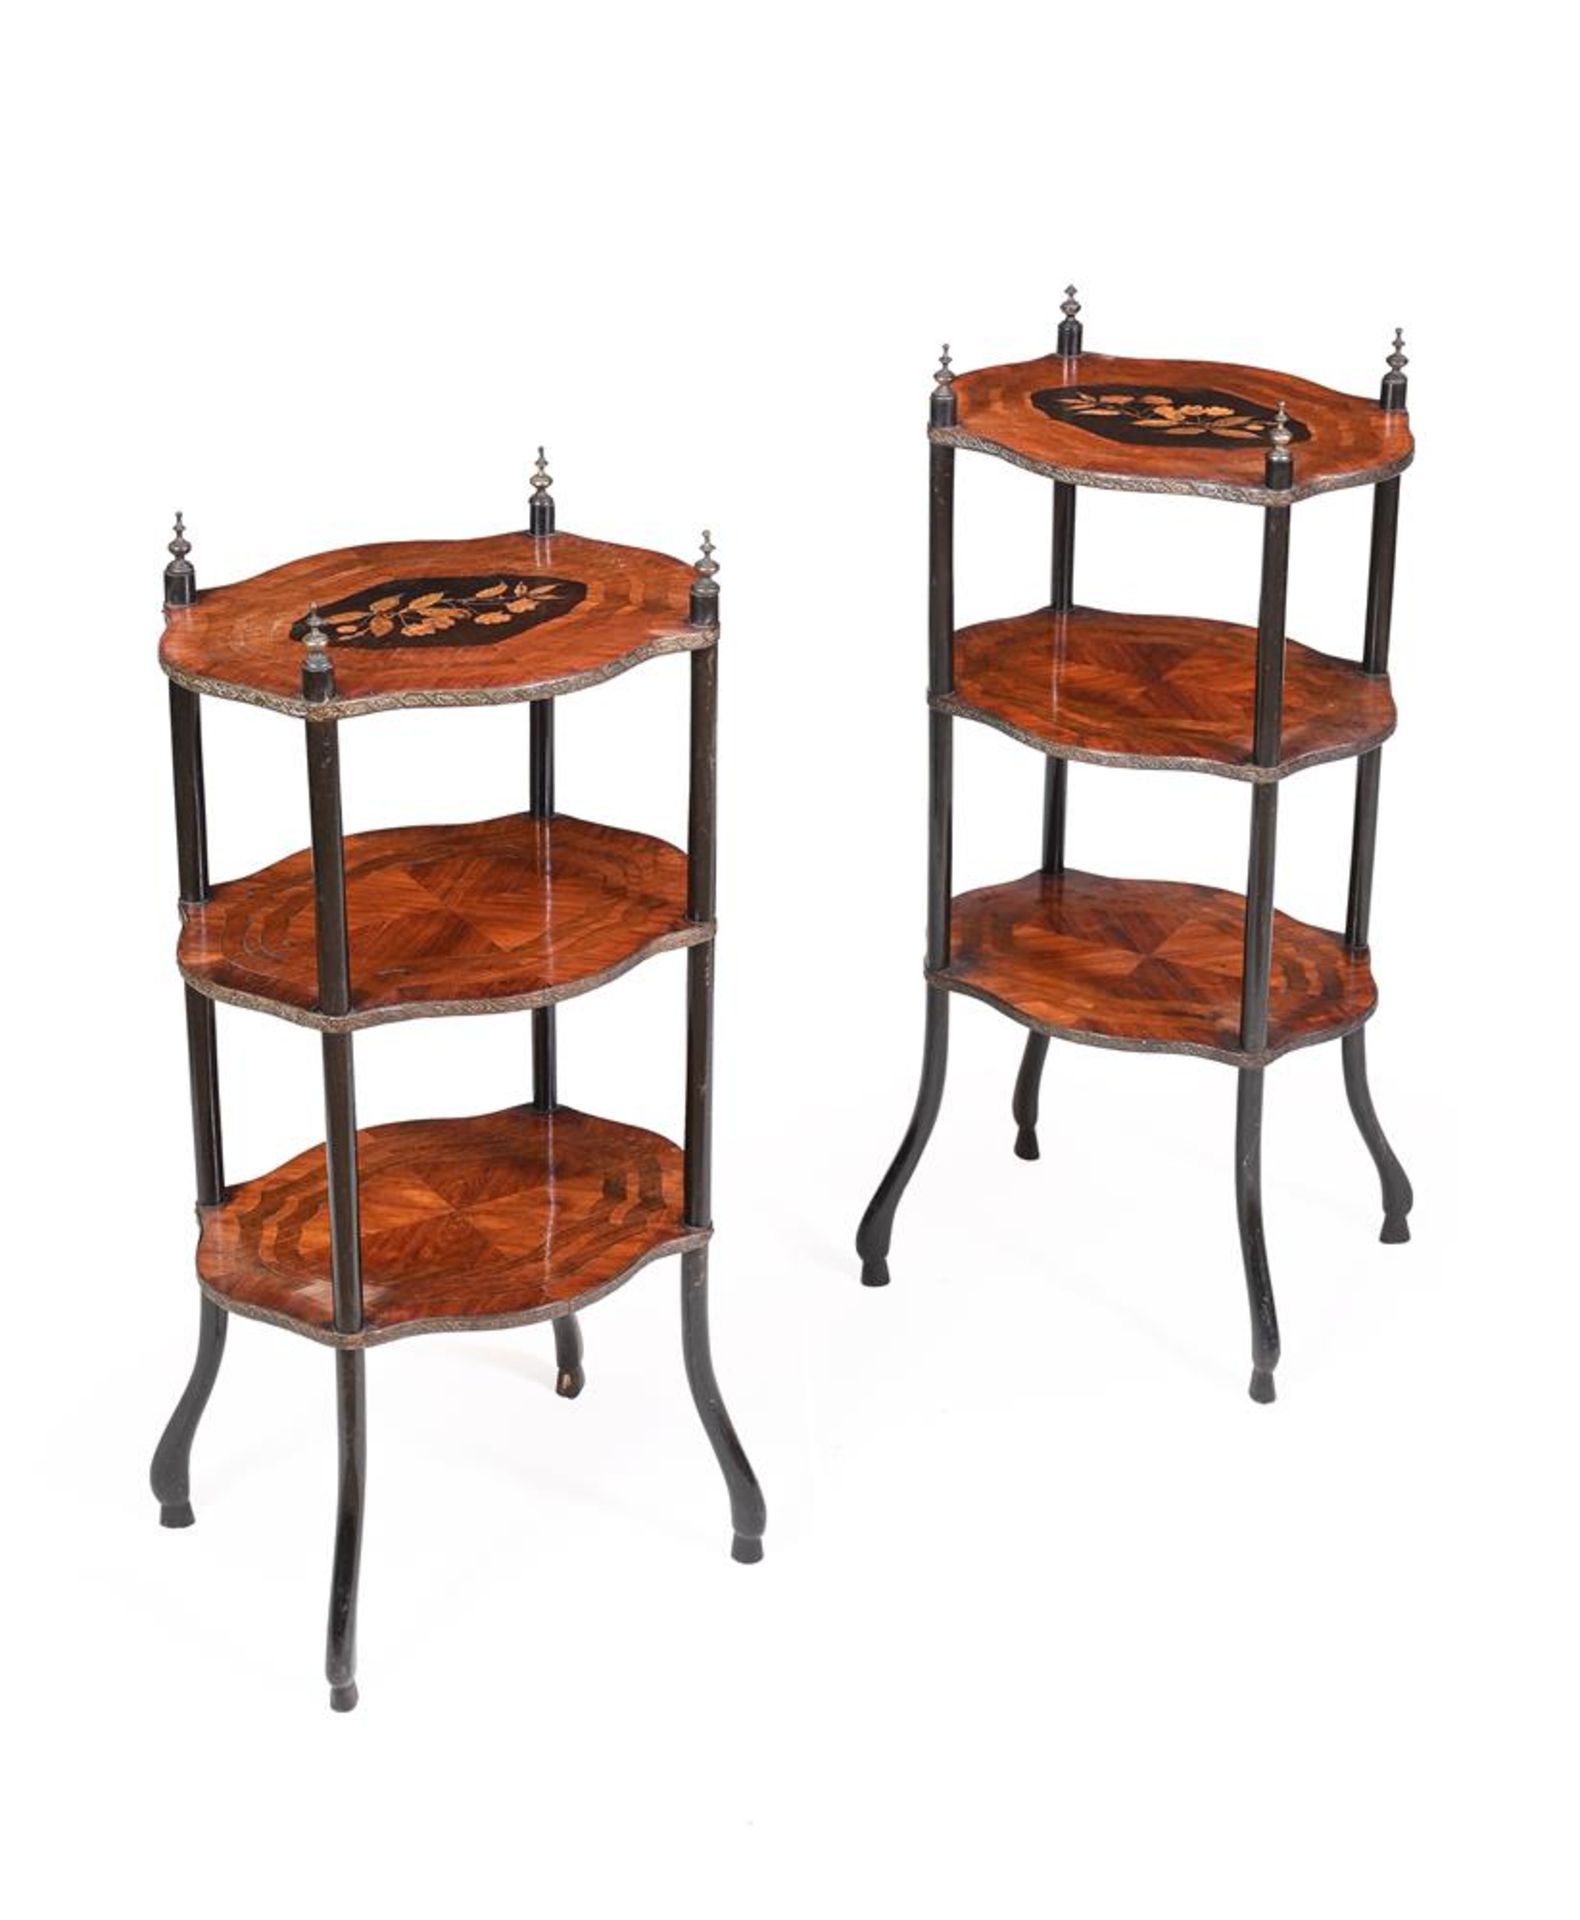 Y A PAIR OF LATE VICTORIAN TULIPWOOD, EBONISED AND MARQUETRY ETAGÈRES, LATE 19TH CENTURY